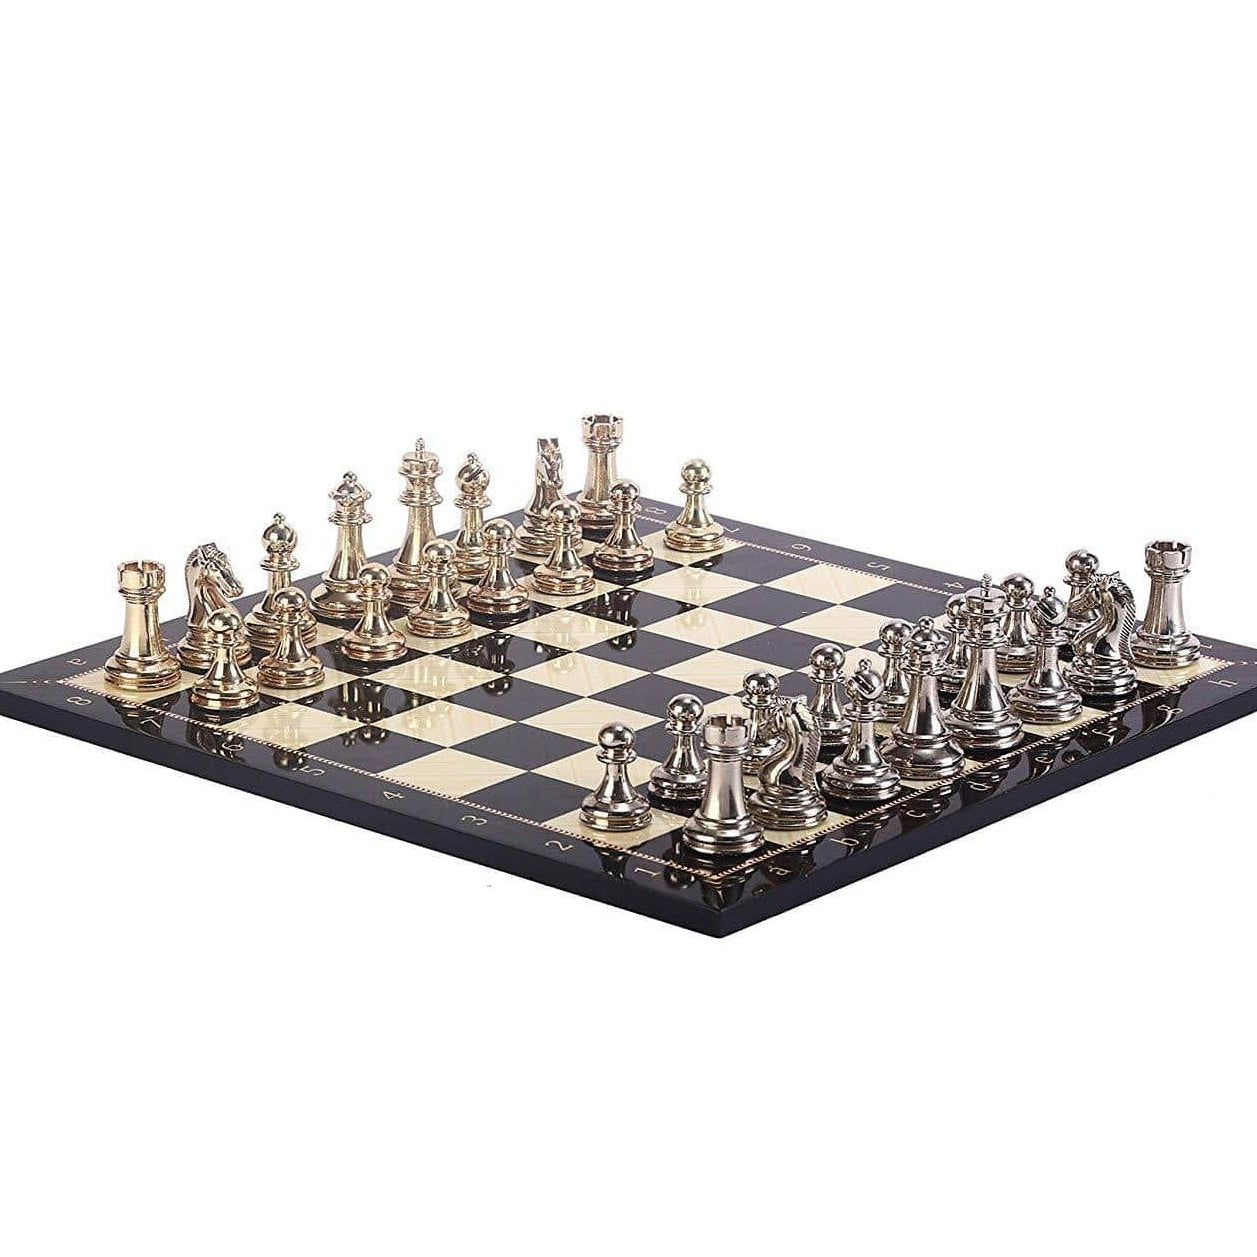 Handmade Pieces And Walnut Patterned Wood Chessboard | whatagift.com.au.